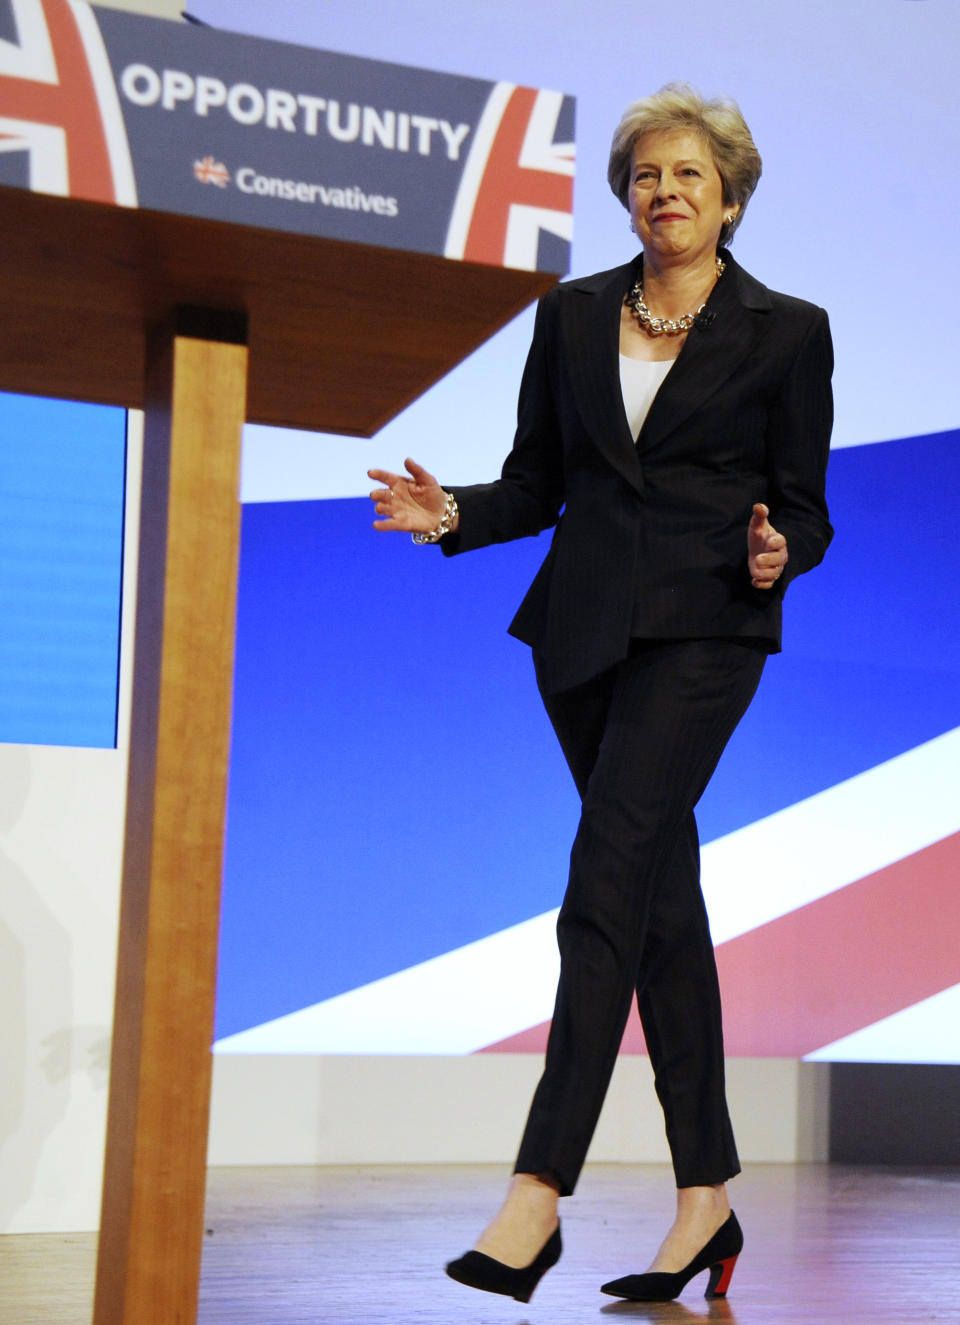 FILE - In this Wednesday, Oct. 3 , 2018 file photo Conservative Party Leader and Prime Minister Theresa May dances as she arrives on stage to address delegates during a speech at the Conservative Party Conference at the ICC, in Birmingham, England. (AP Photo/Rui Vieira)